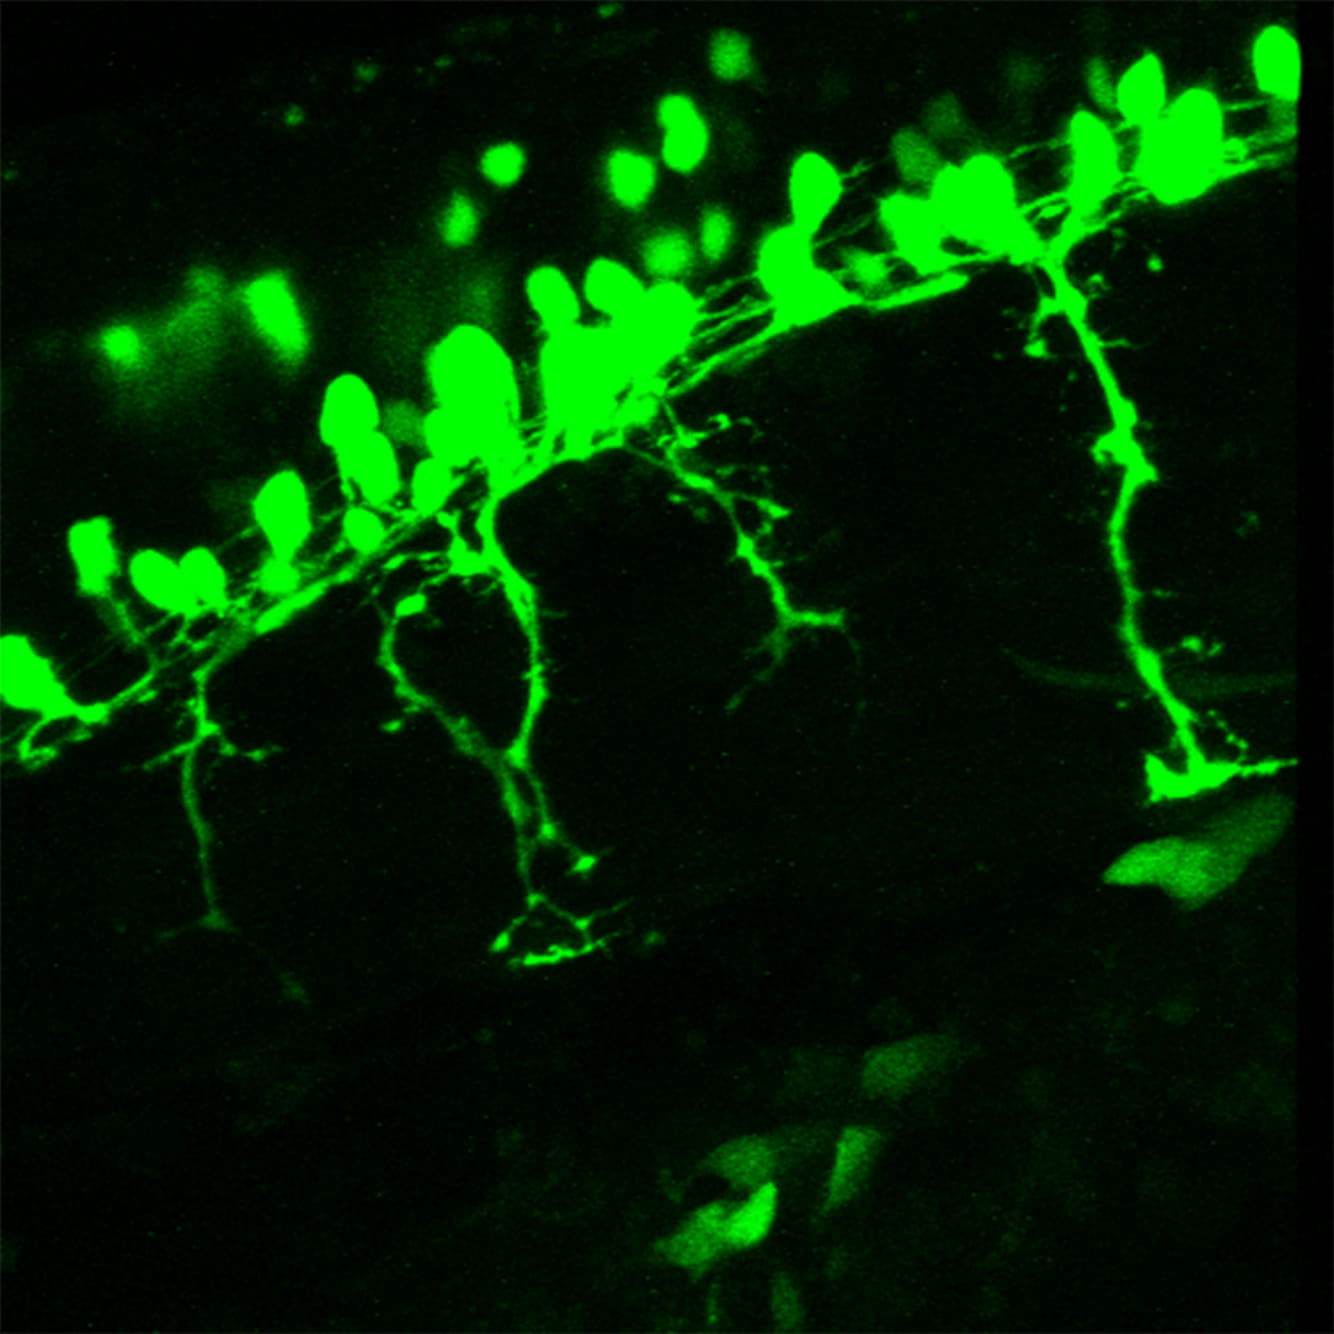 Image of flourescent branched axons